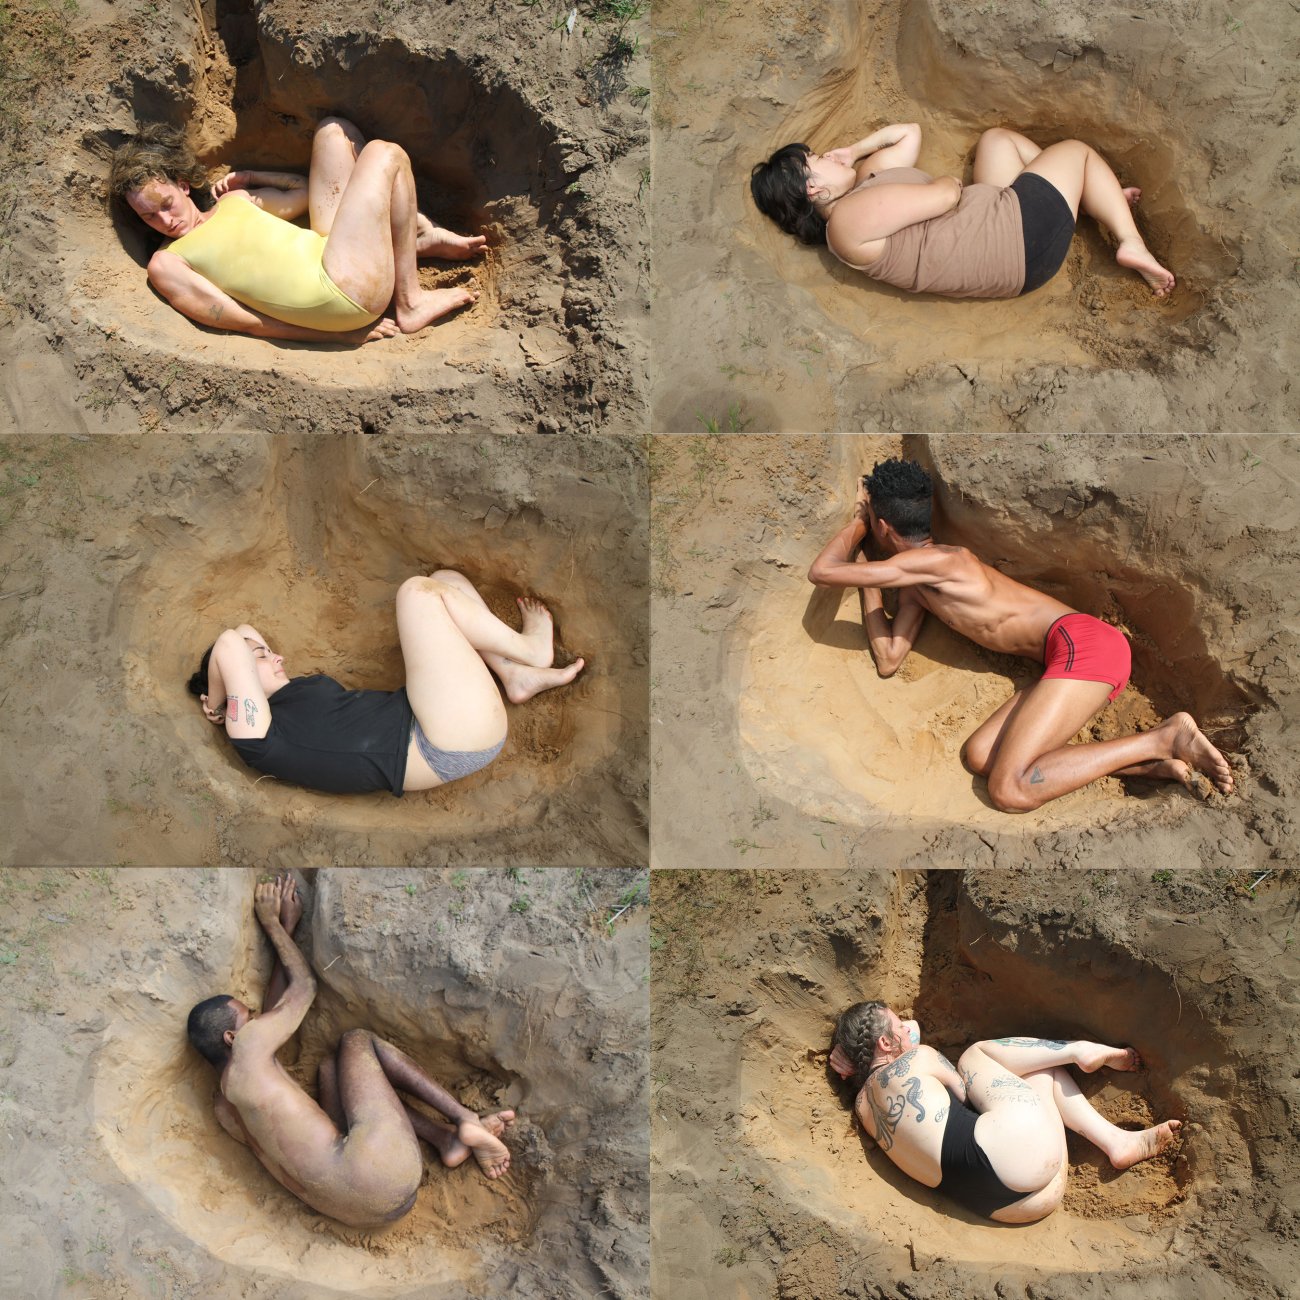 Image shows 6 different images all showing 6 figures each curled inside a dug out hole in the dirt.